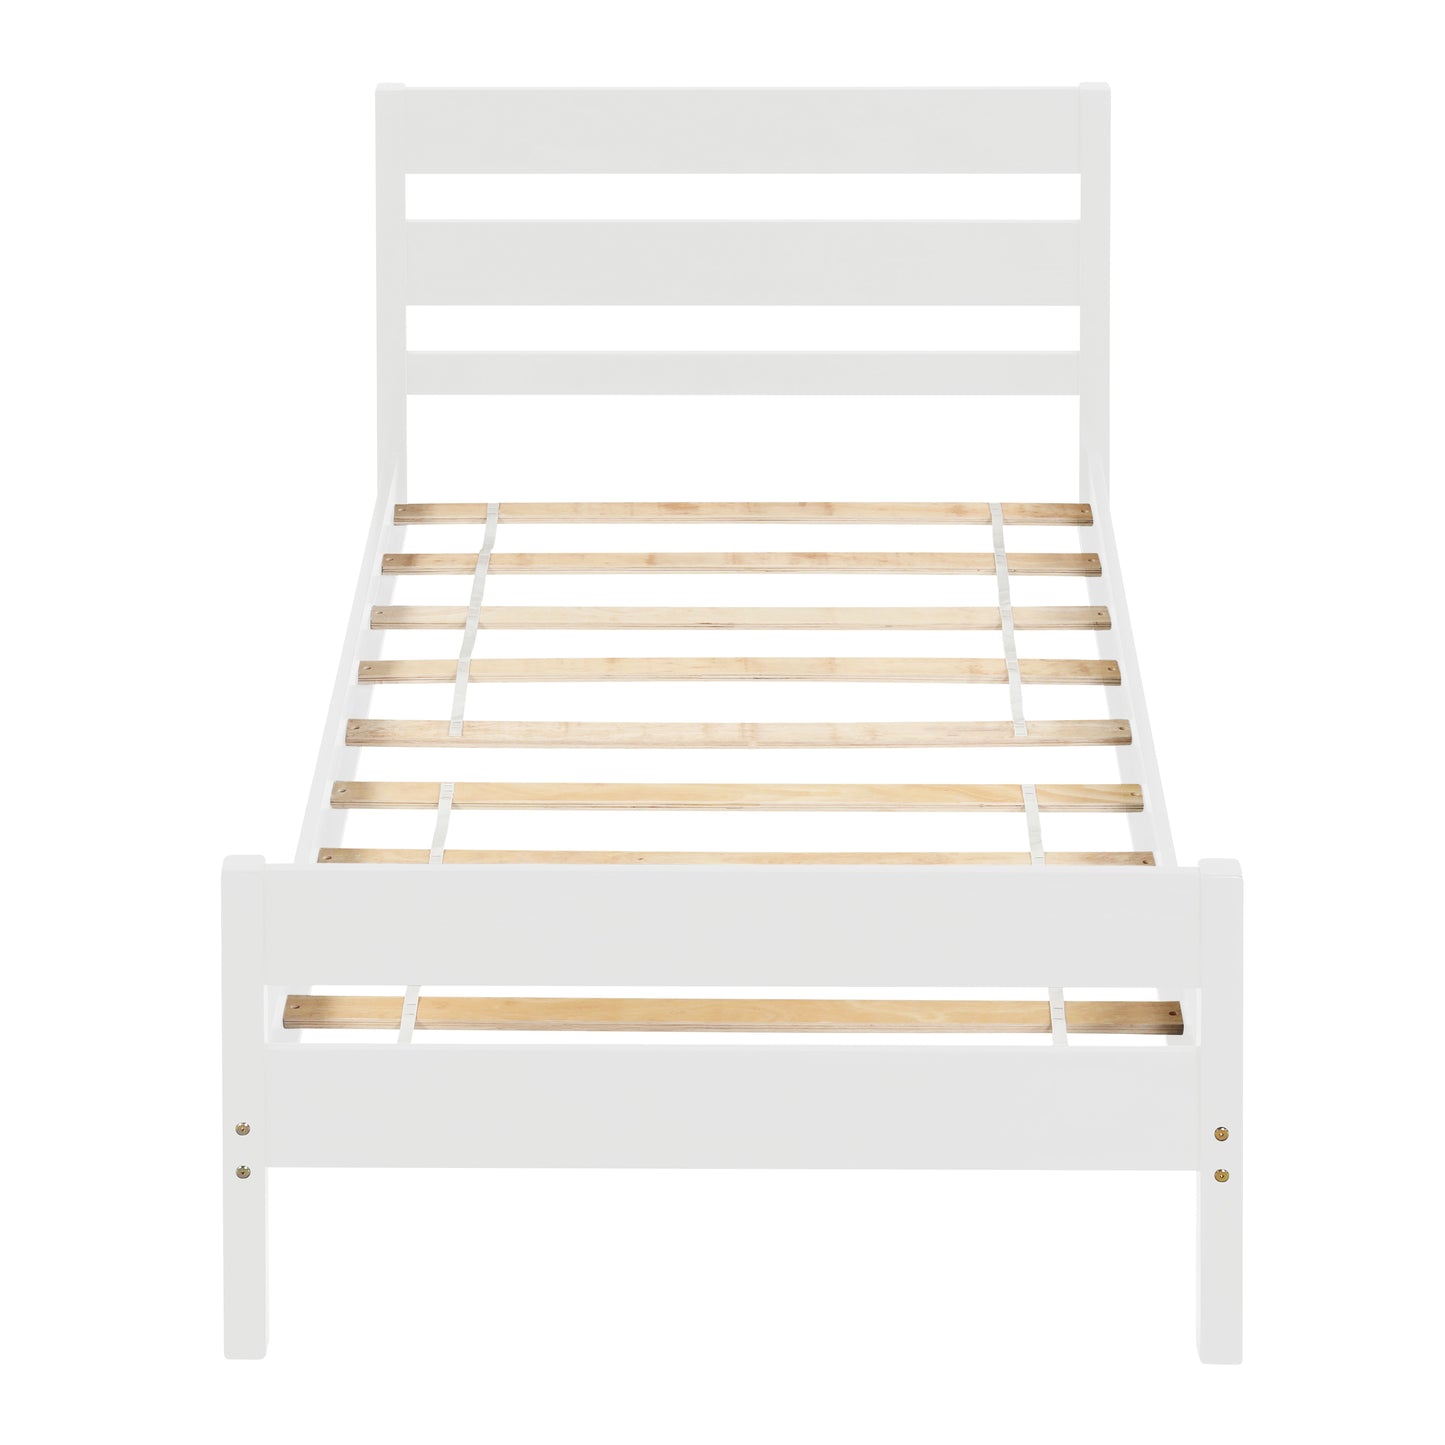 SYNGAR White Wood Platform Bed Frame Twin Size with Headboard and Footboard, Underbed Storage, Strong Slat Support, No Box Spring Needed, Twin Bed Frame for Kids Teens Adults